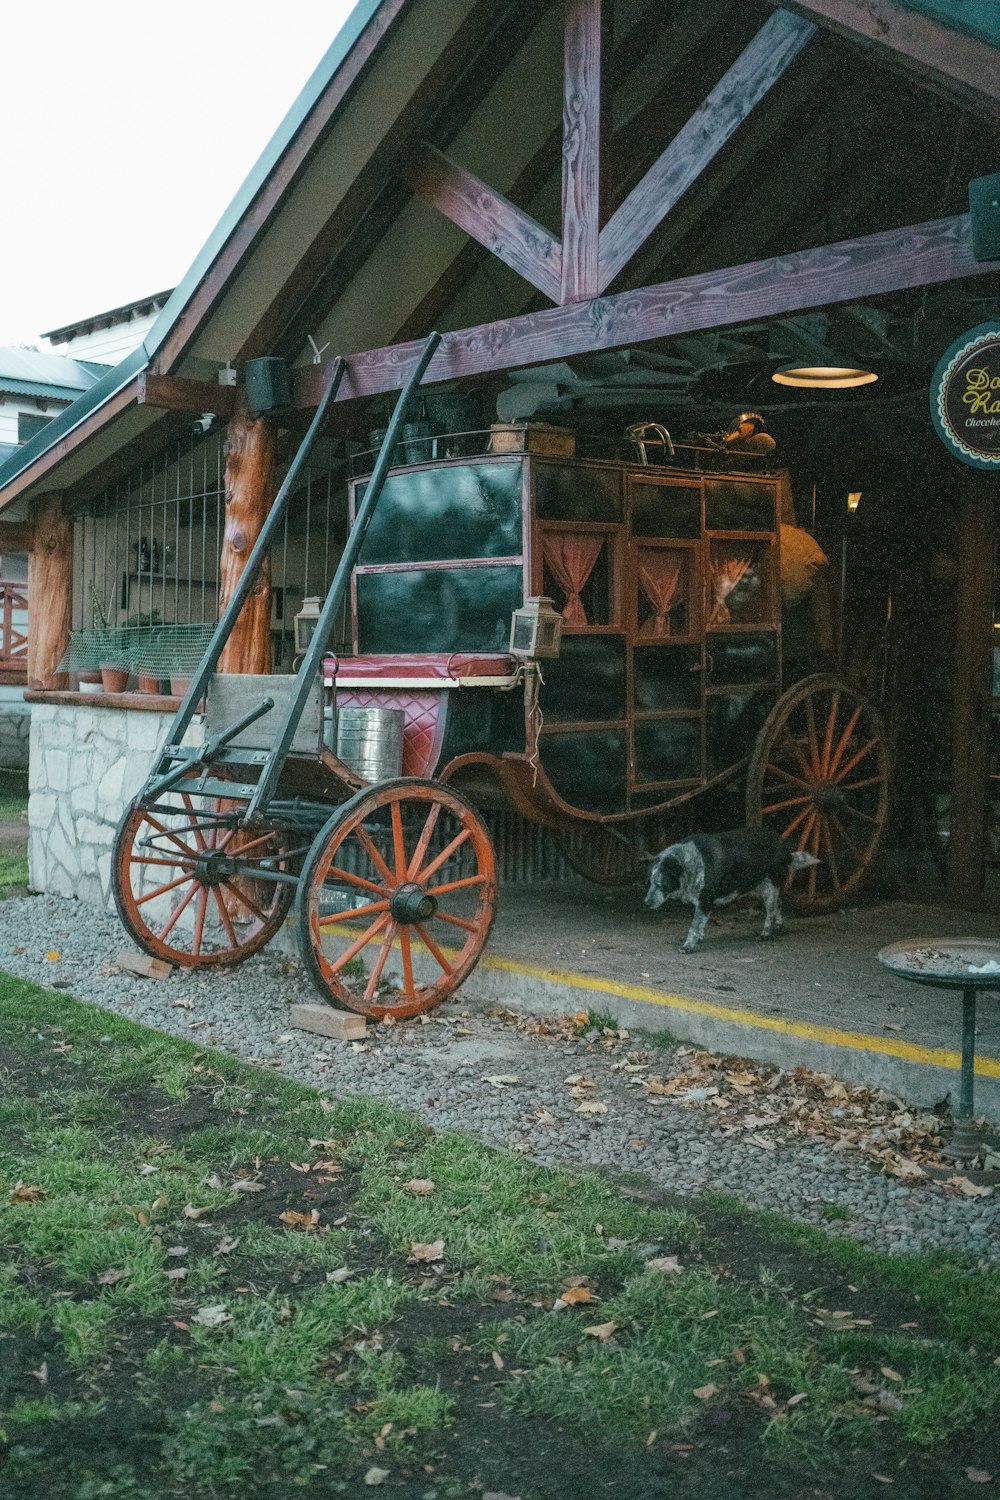 a horse drawn carriage parked in front of a building